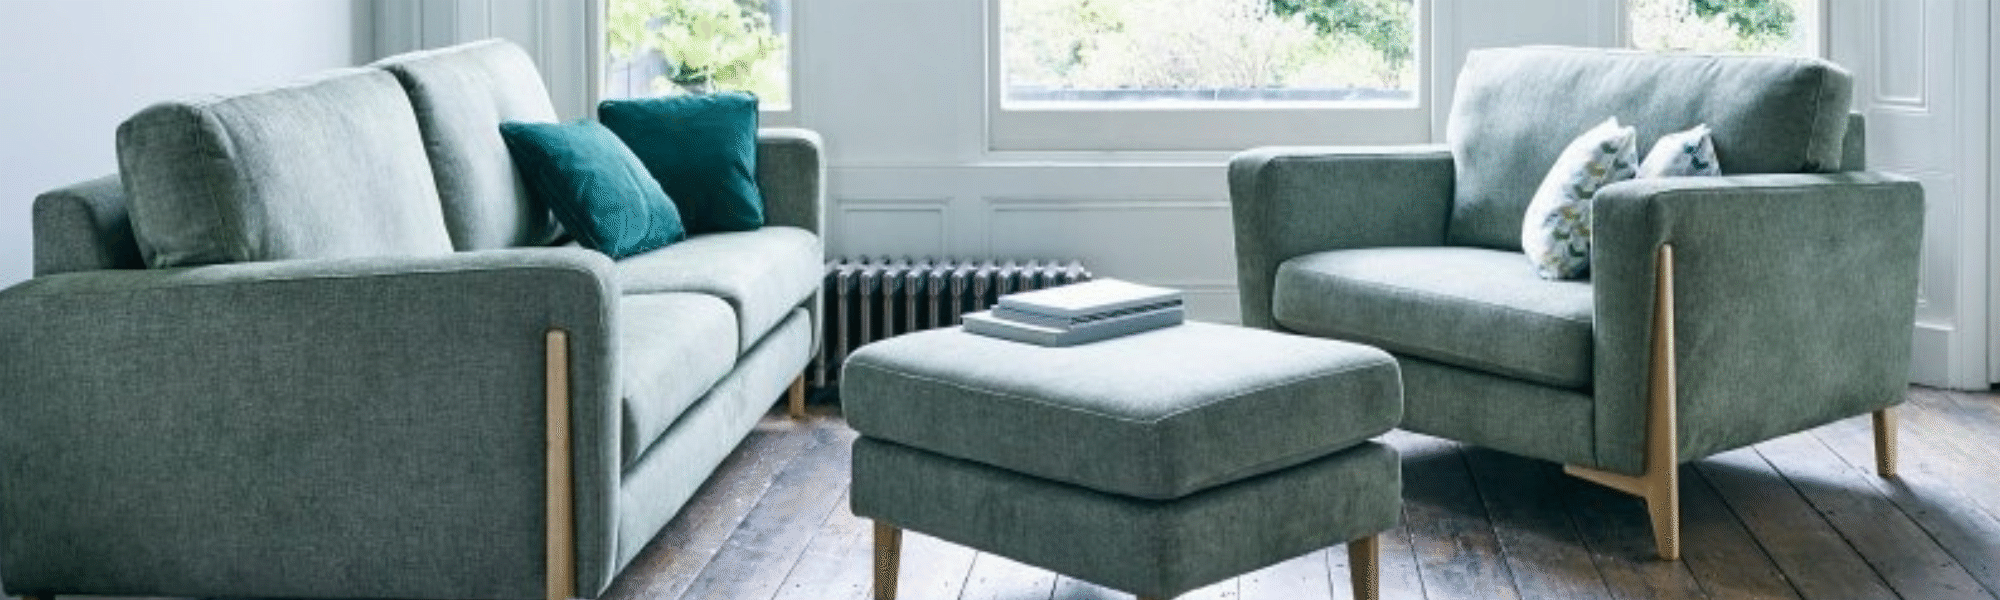 Ercol Upholstery